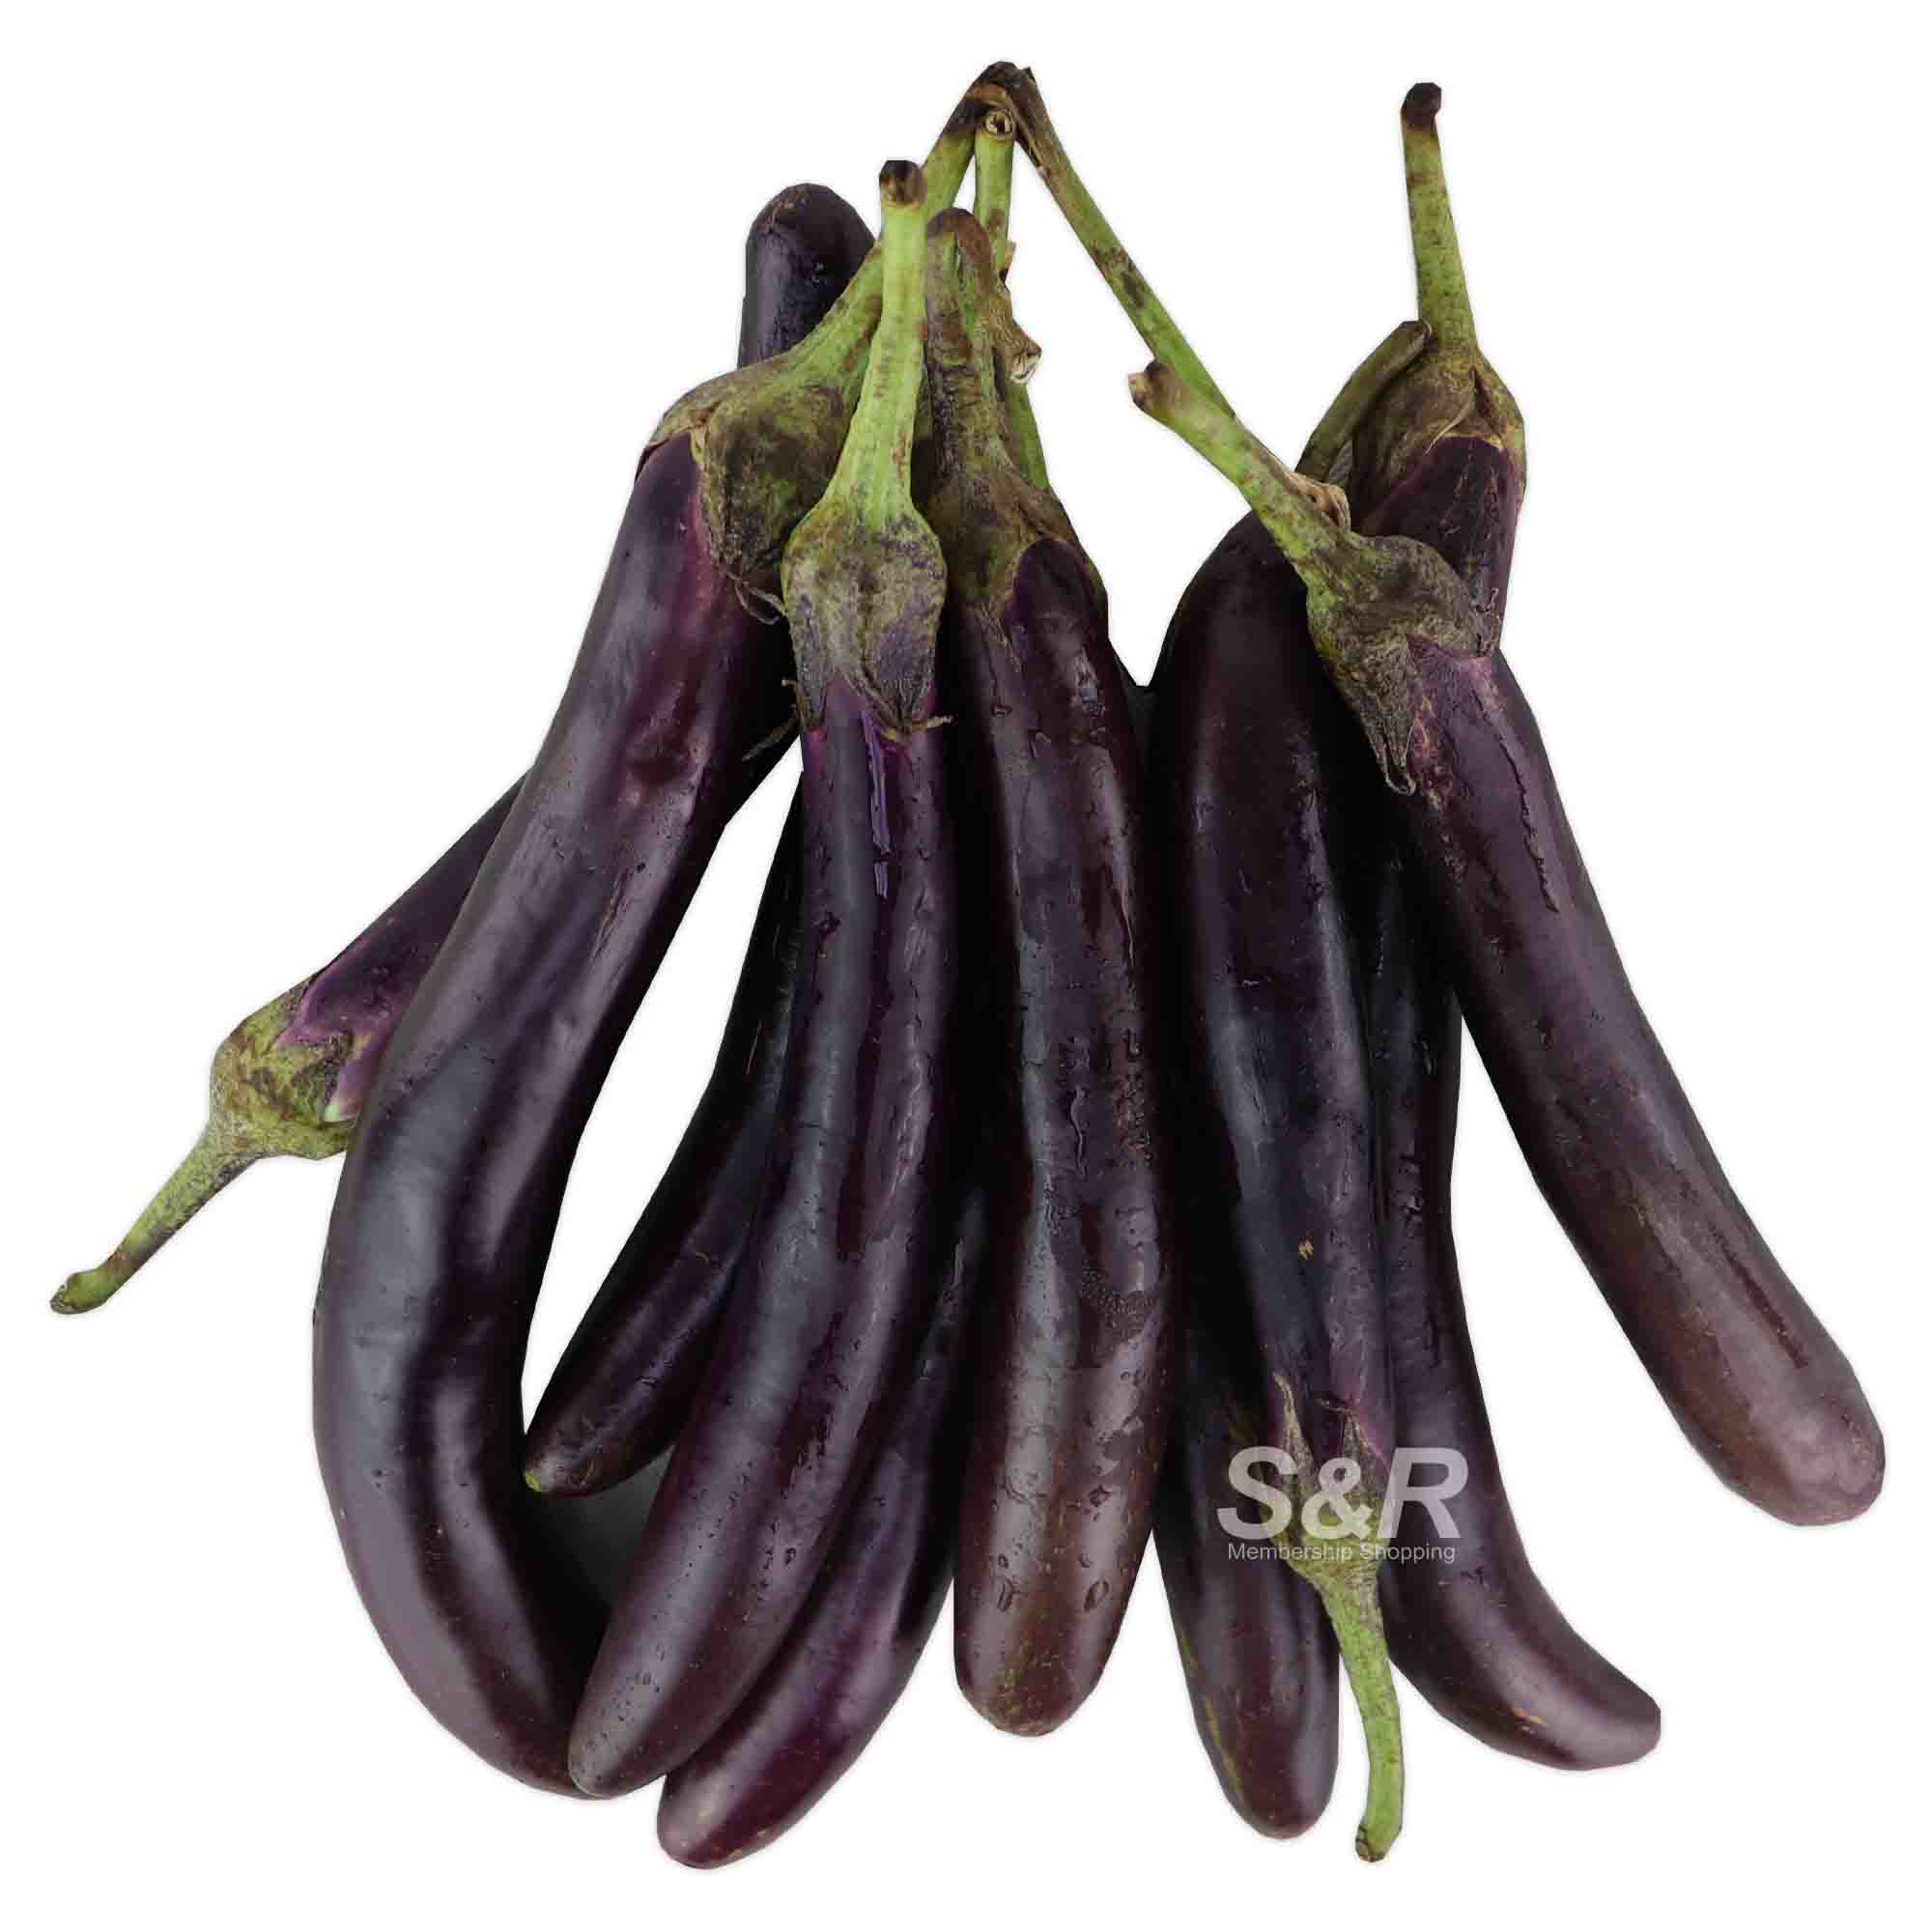 S&R Eggplant approx. 3.5kg